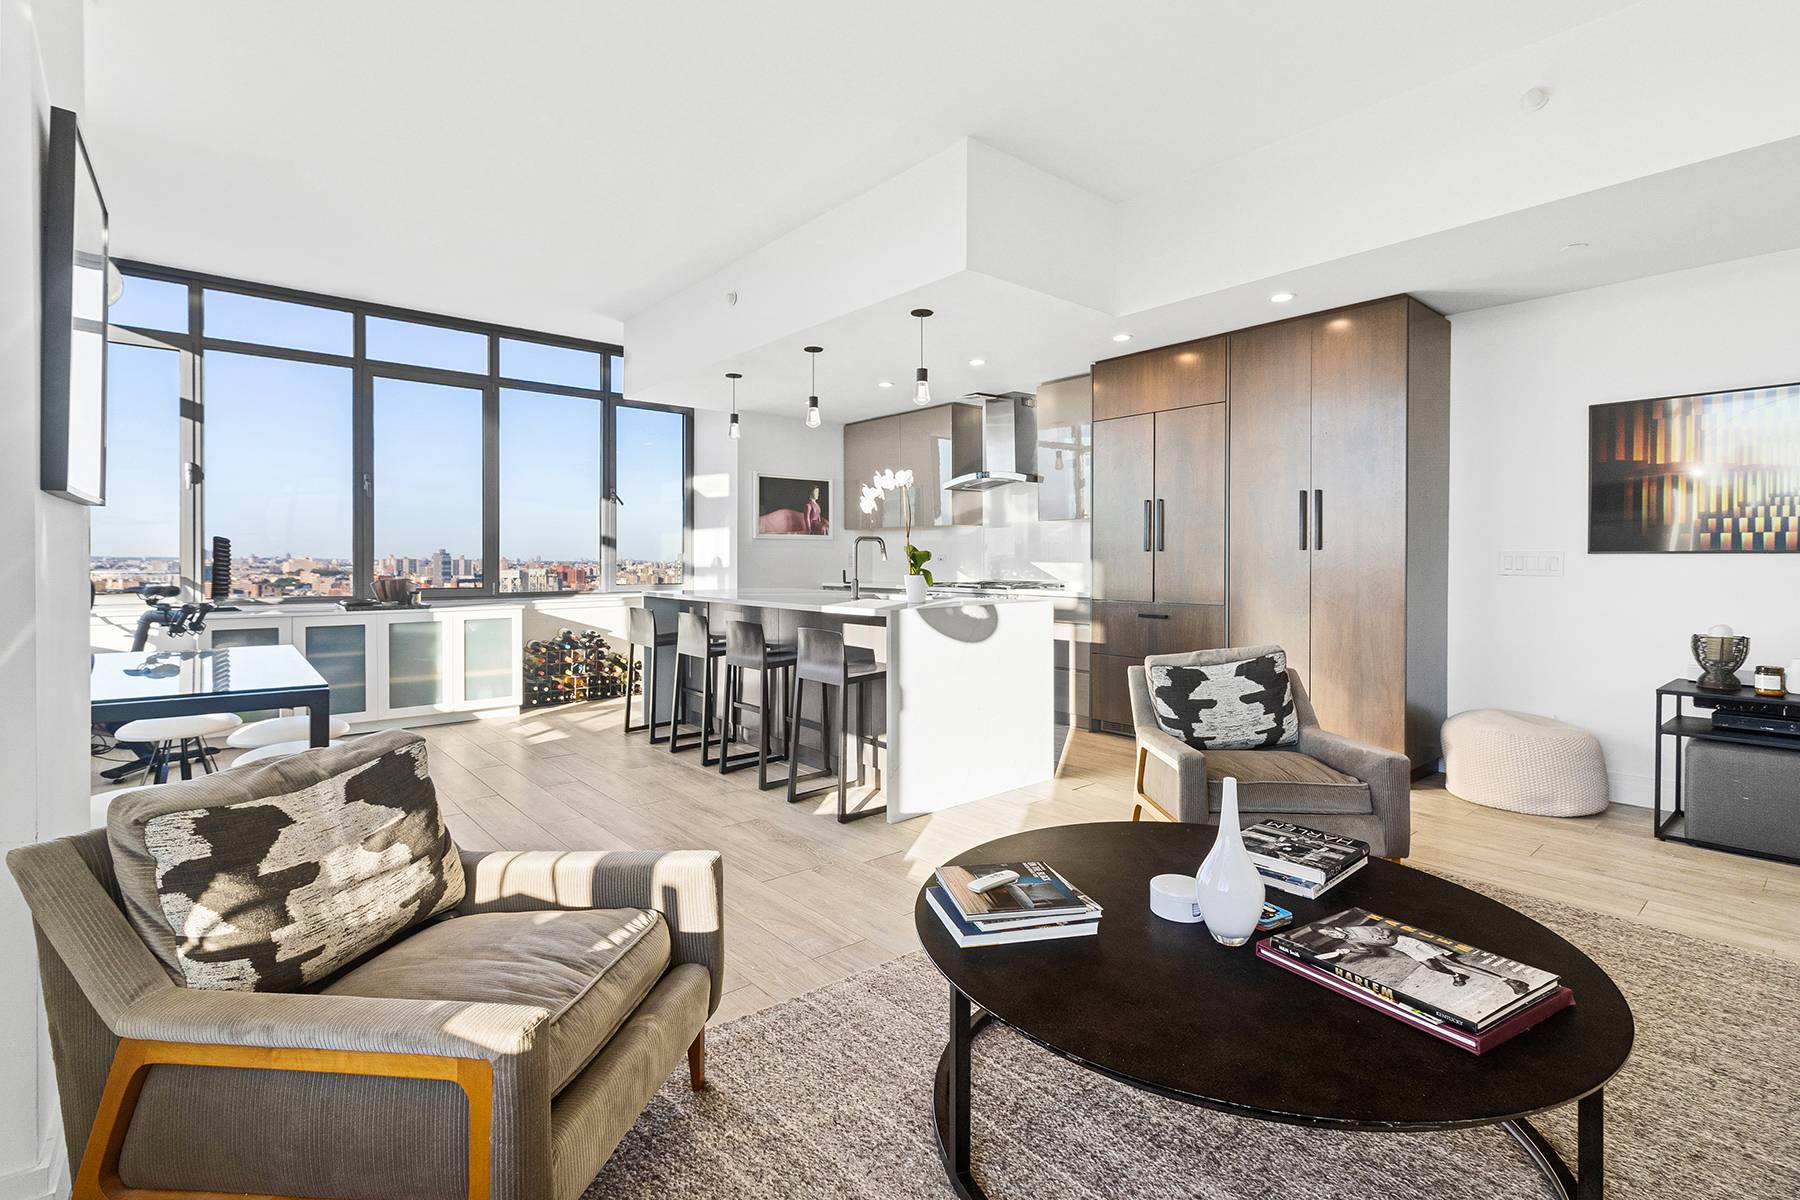 Perched high above the corner of Fifth Avenue and South Harlem's Marcus Garvey Park, residence 25F is where downtown loft chic meets New York's most iconic address.